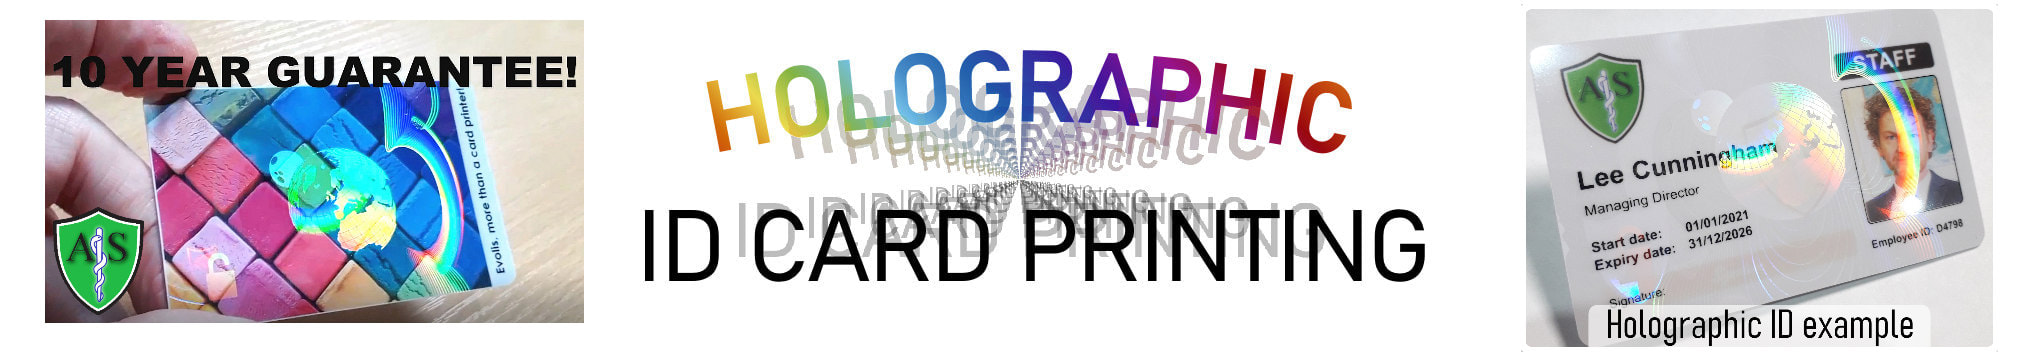 Swansea holographic ID card print service. Employee Identity cards with hologram or holograph security mark.